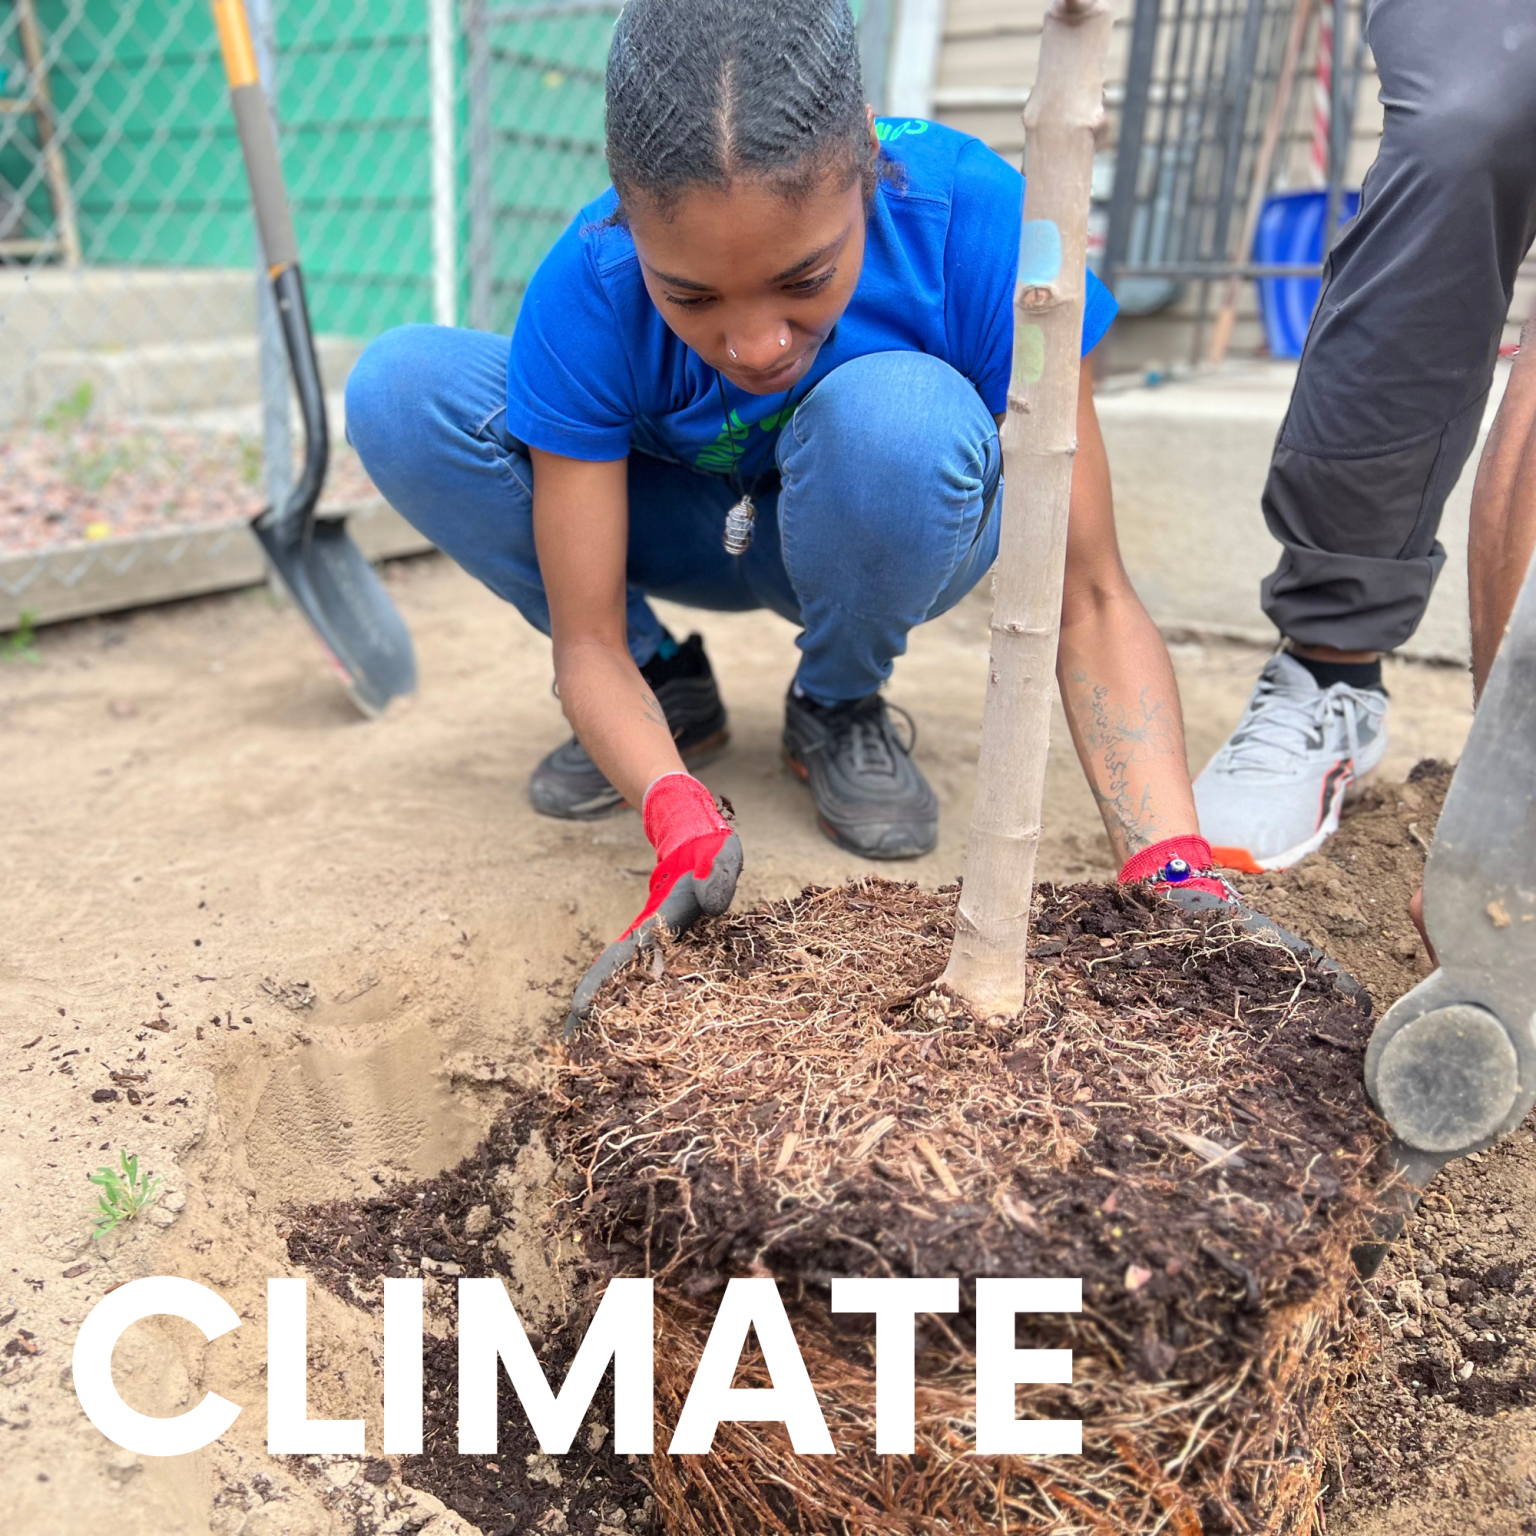 Climate Image of young person planting a tree